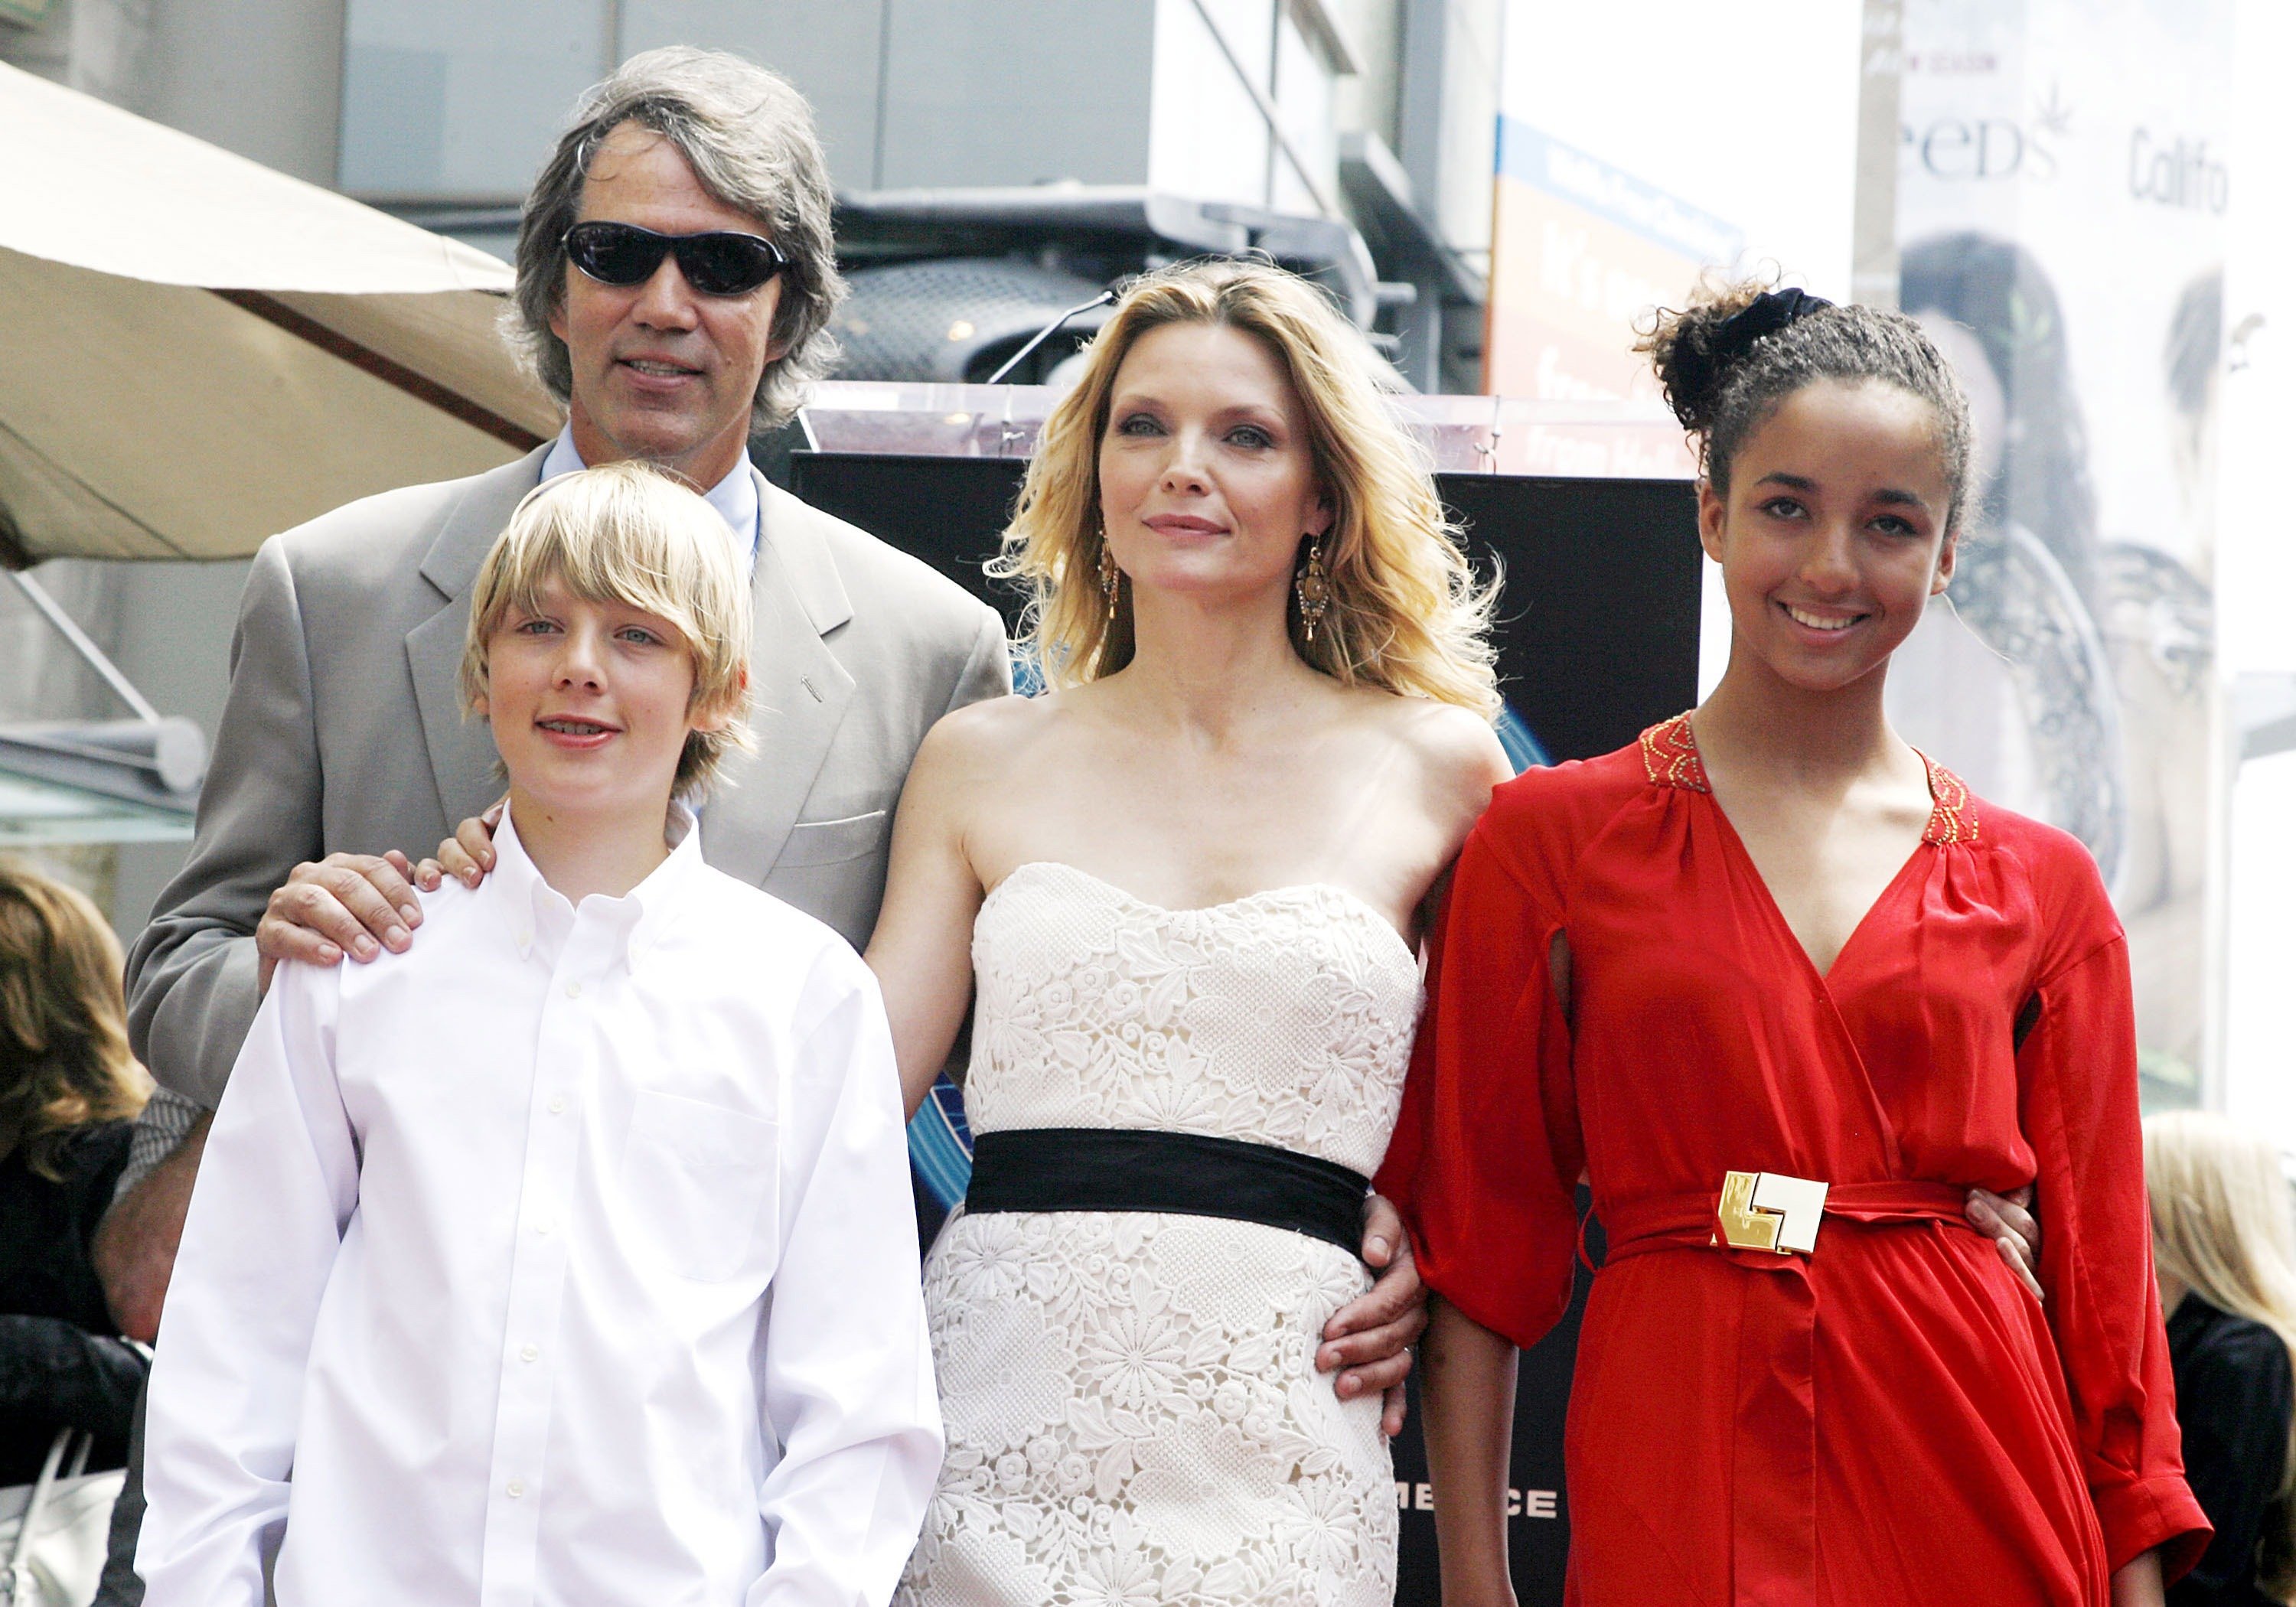 Michelle Pfeiffer, her husband David E. Kelley, their son John and daughter Claudia attend a ceremony honoring Michelle with a star on the Hollywood Walk of Fame on August 6, 2007, in Los Angeles, California | Source: Getty Images